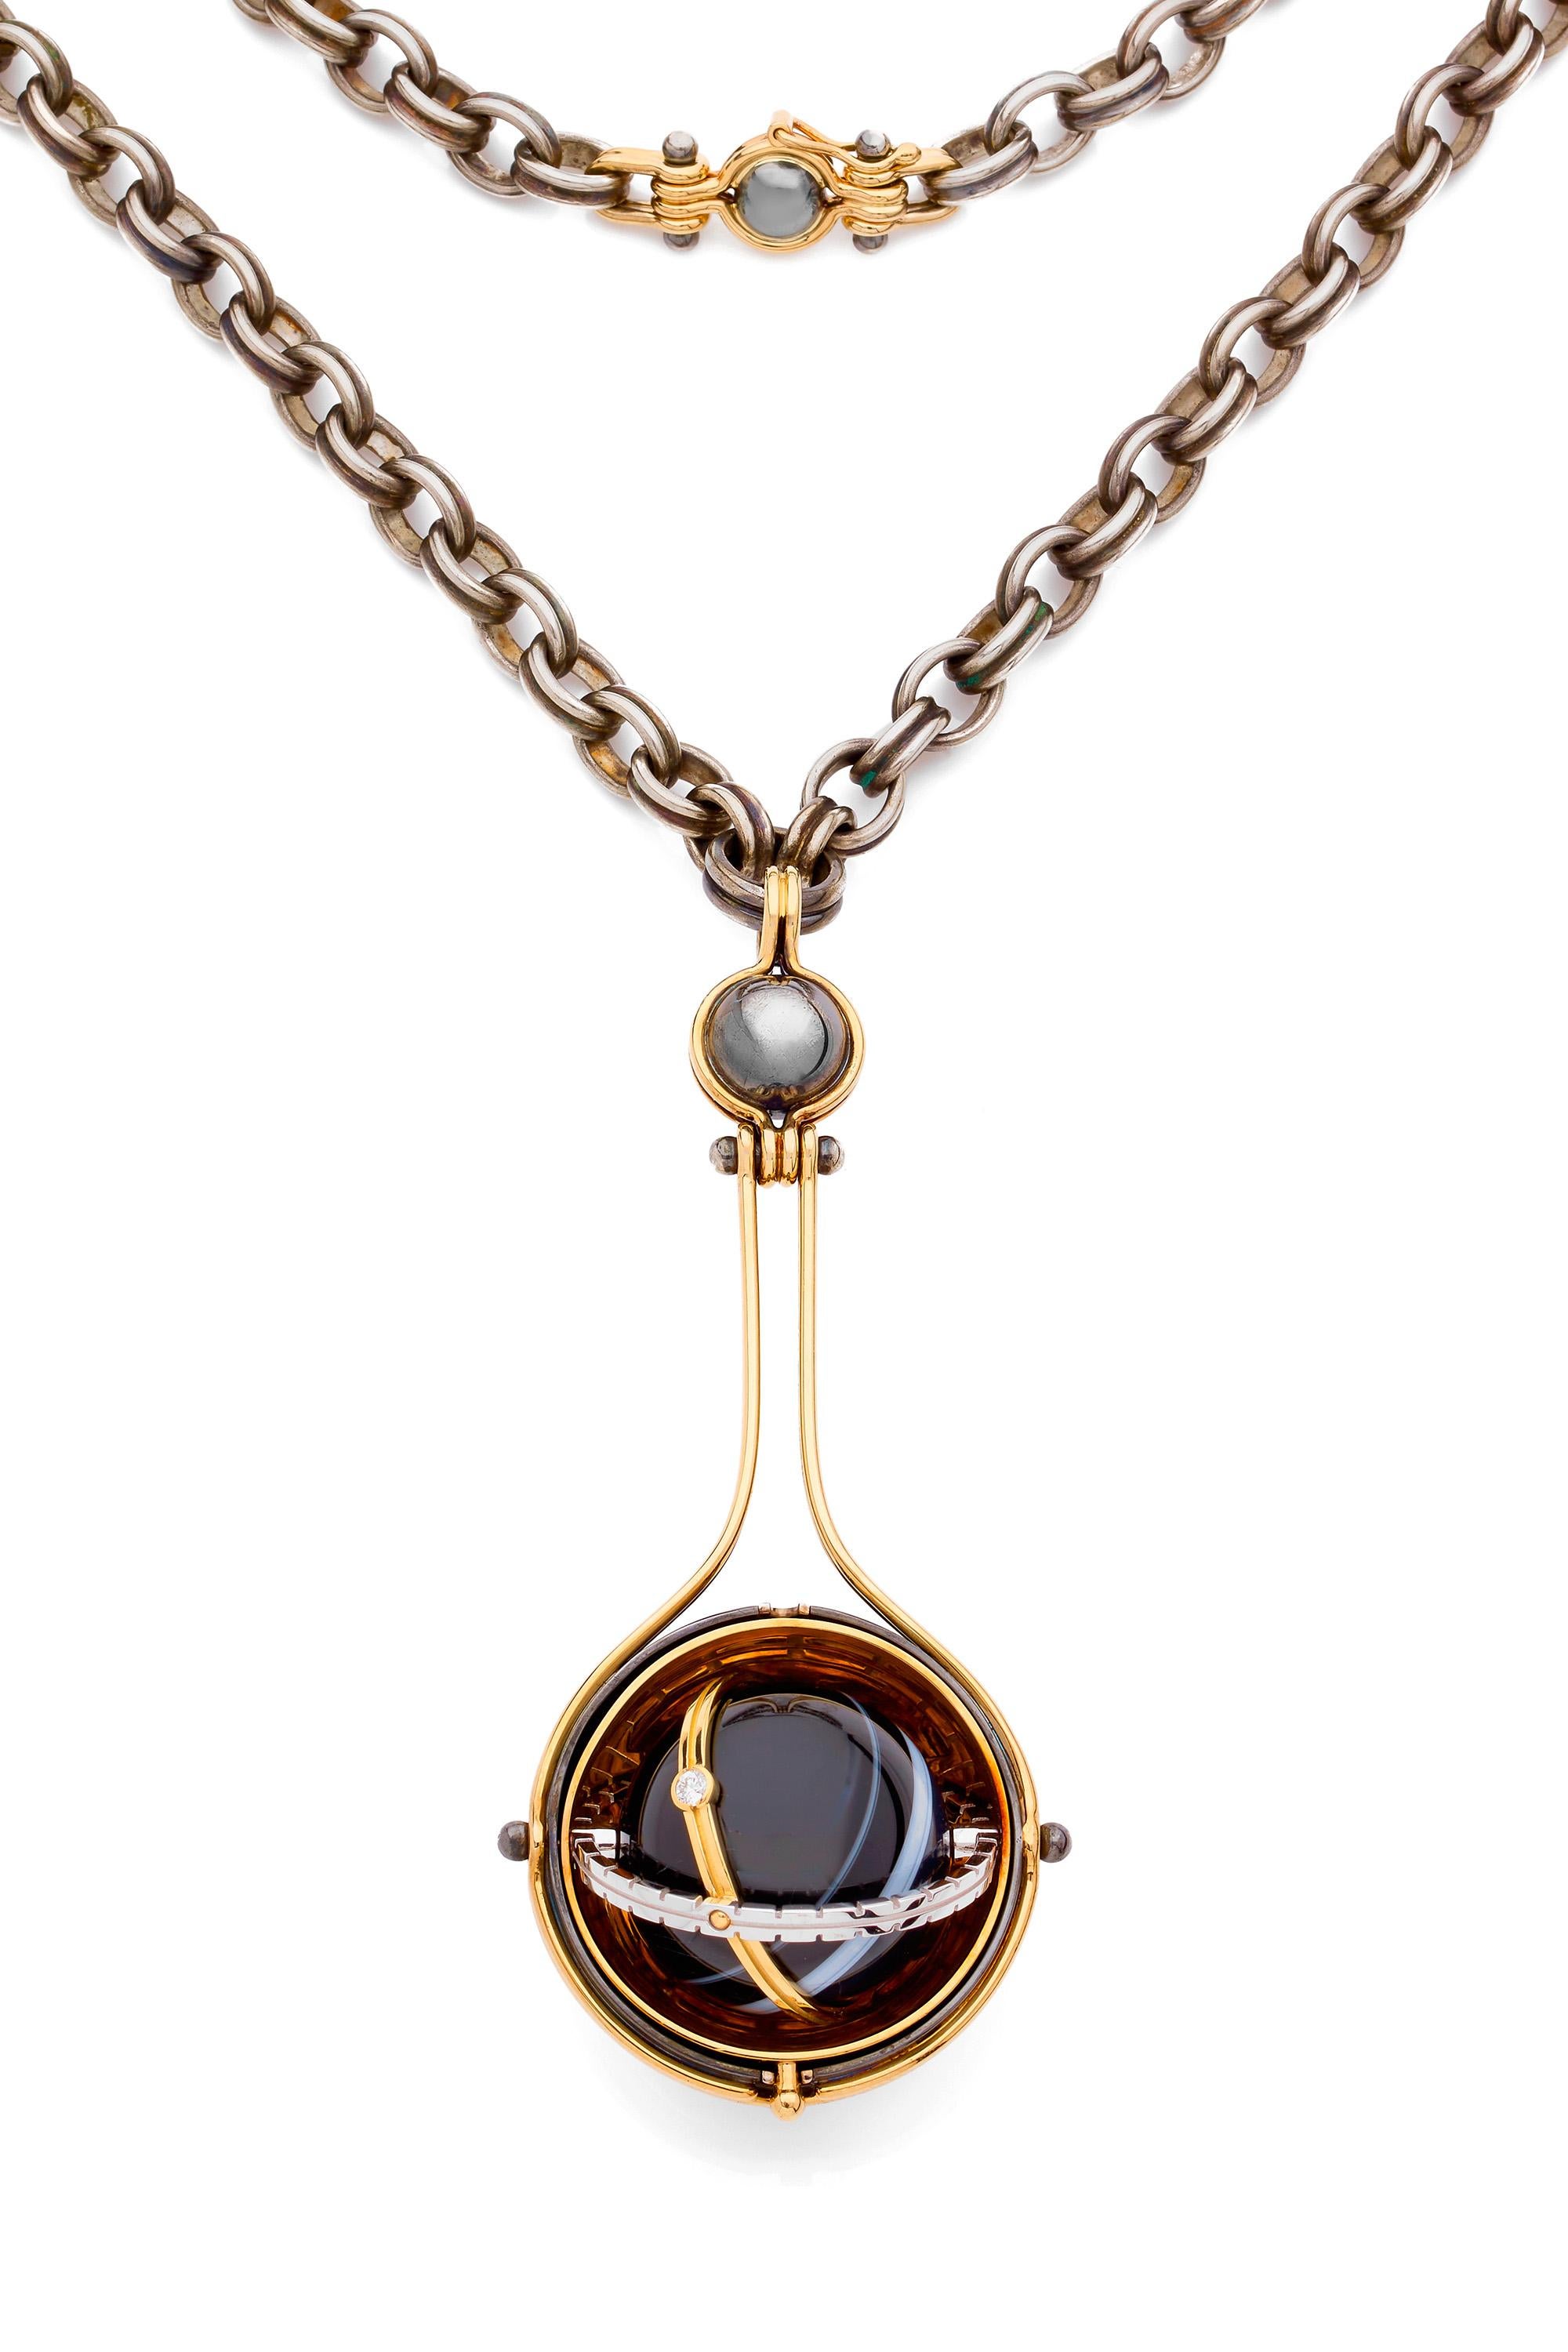 Yellow gold and distressed silver pendant. Rotating sphere revealing an onyx planet, encircled by white gold ring and yellow gold ring, set with a diamond.  

Distressed silver chain.

Details:
Onyx Nicolo: ø 23mm
Diamonds: 0,06 cts
18k Yellow Gold: